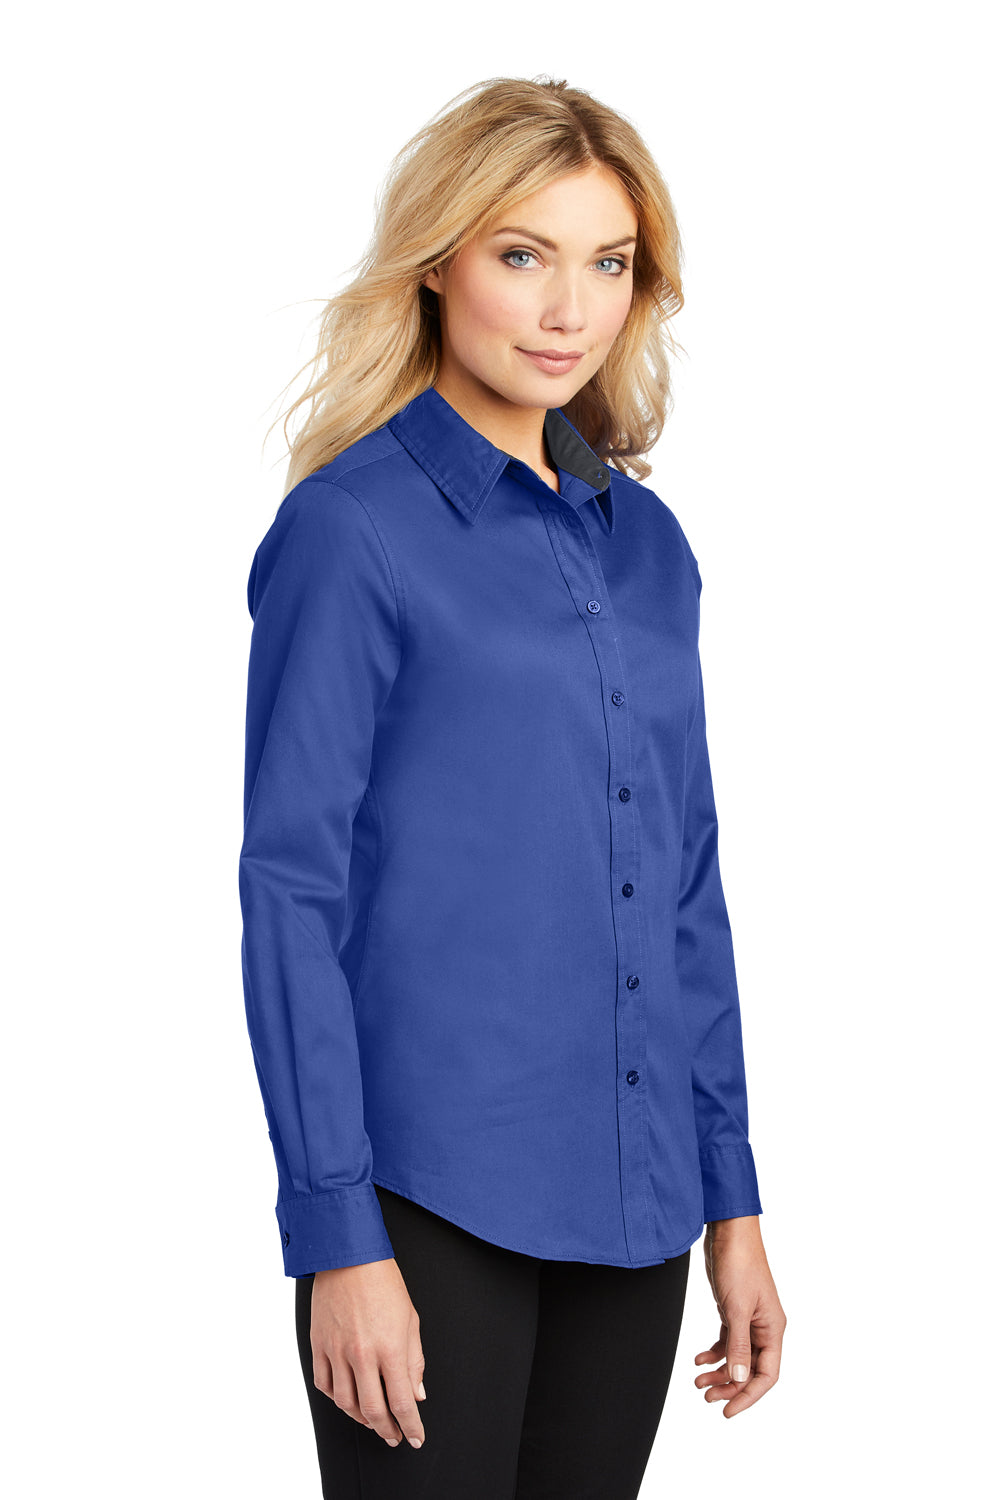 Port Authority L608 Womens Easy Care Wrinkle Resistant Long Sleeve Button Down Shirt Royal Blue 3Q